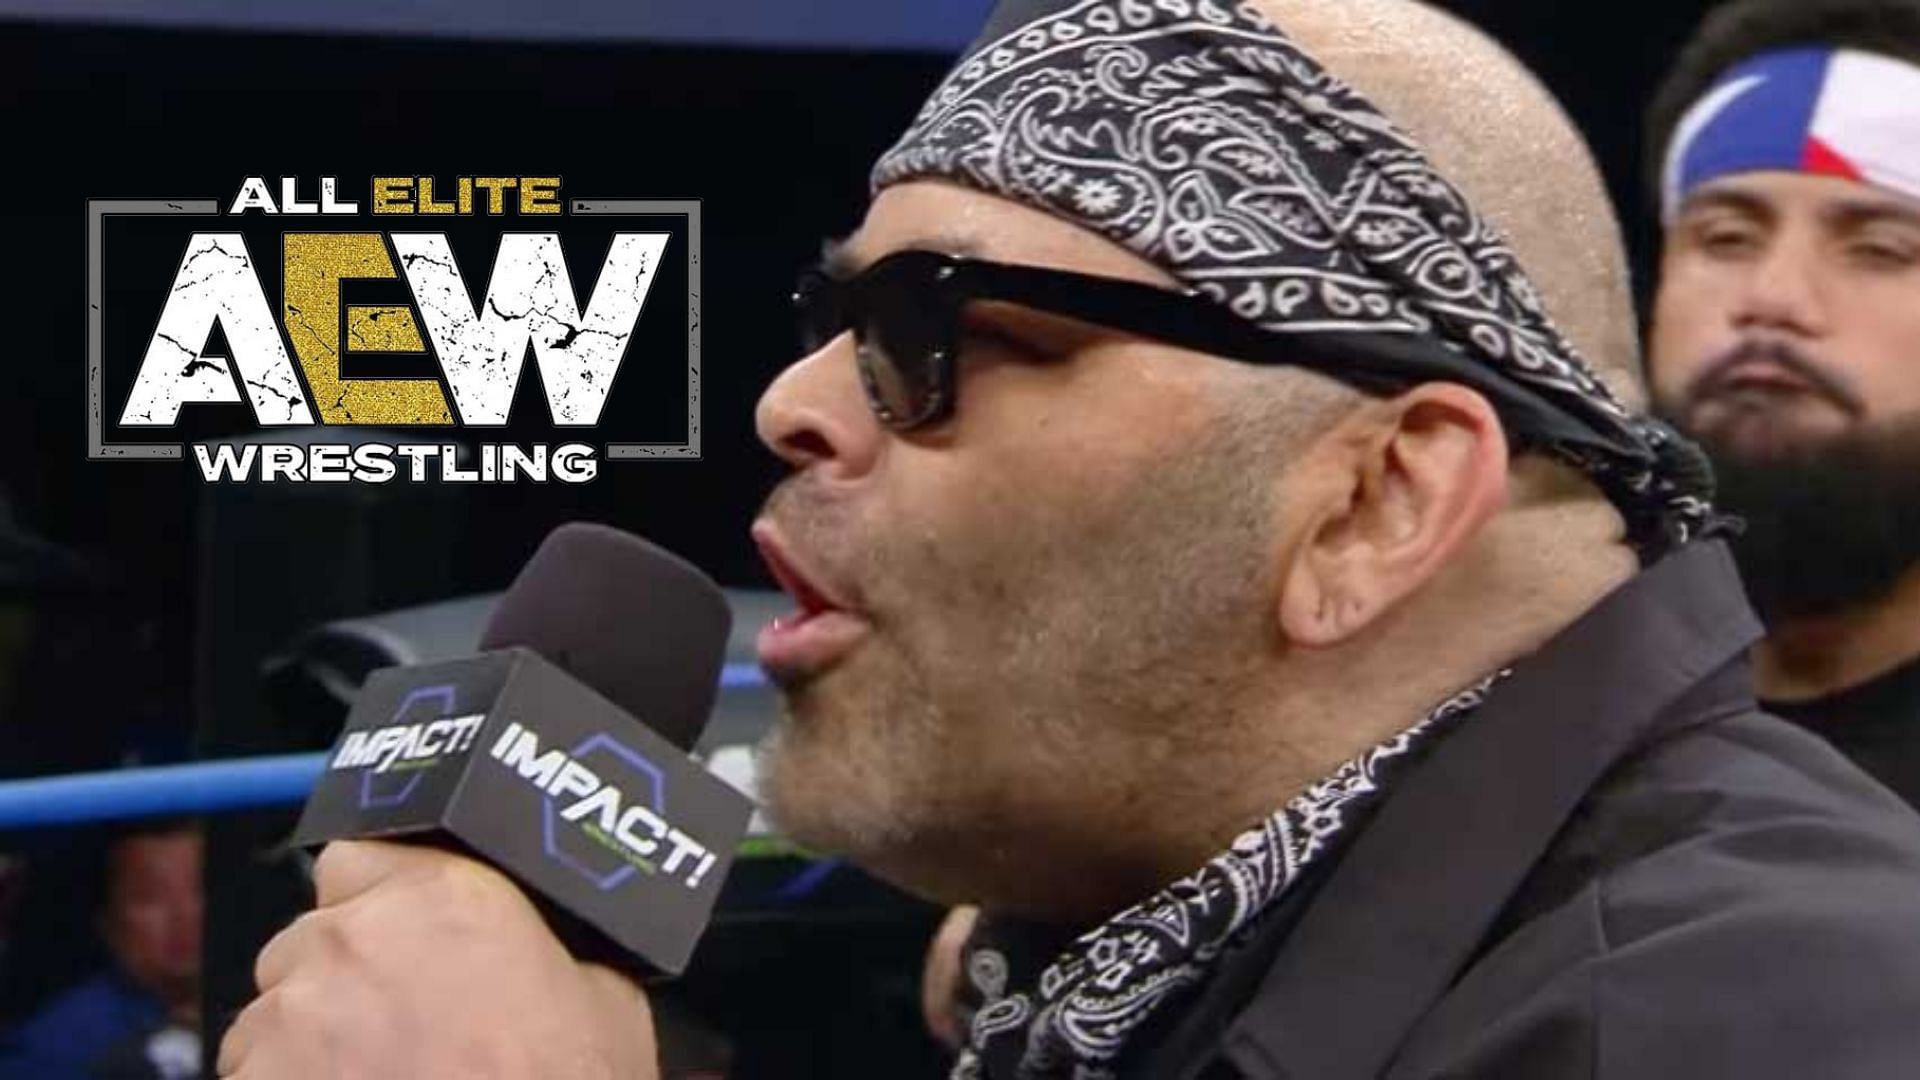 Konnan says a former IMPACT wrestler now AEW star has tons of potential.